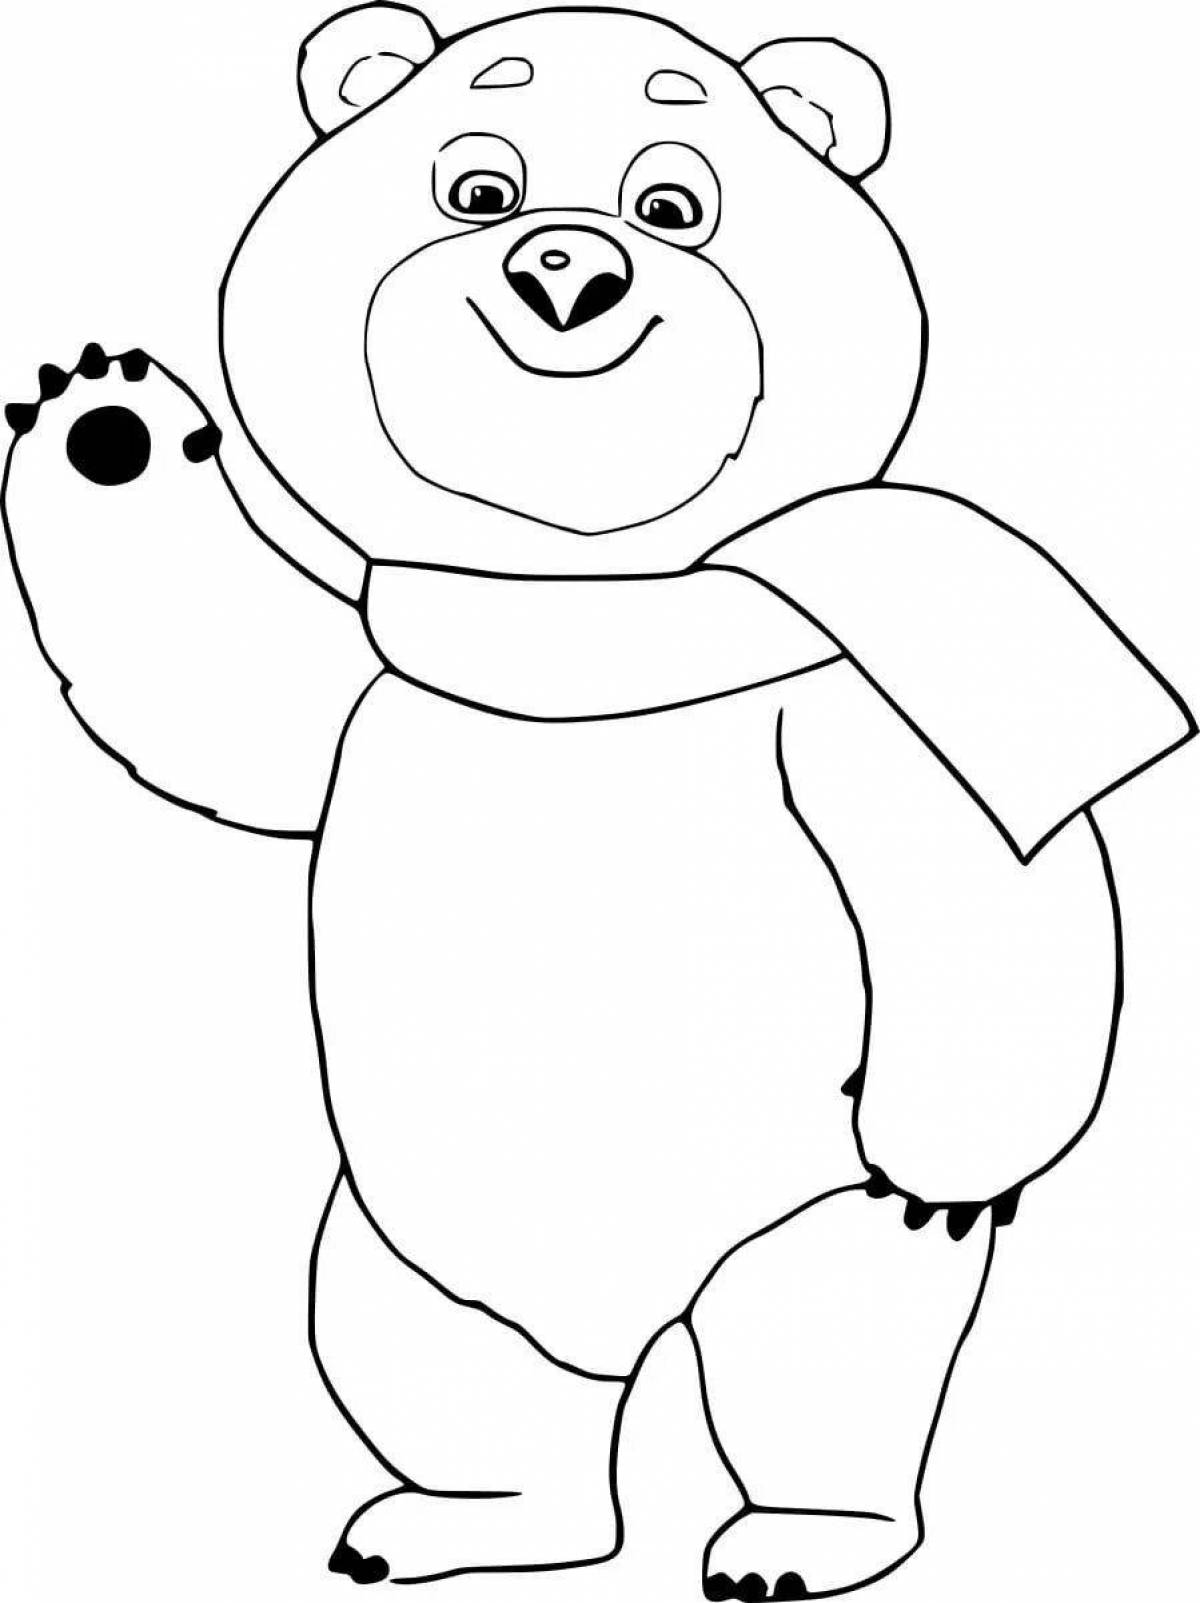 Sparkly olympic bear coloring page